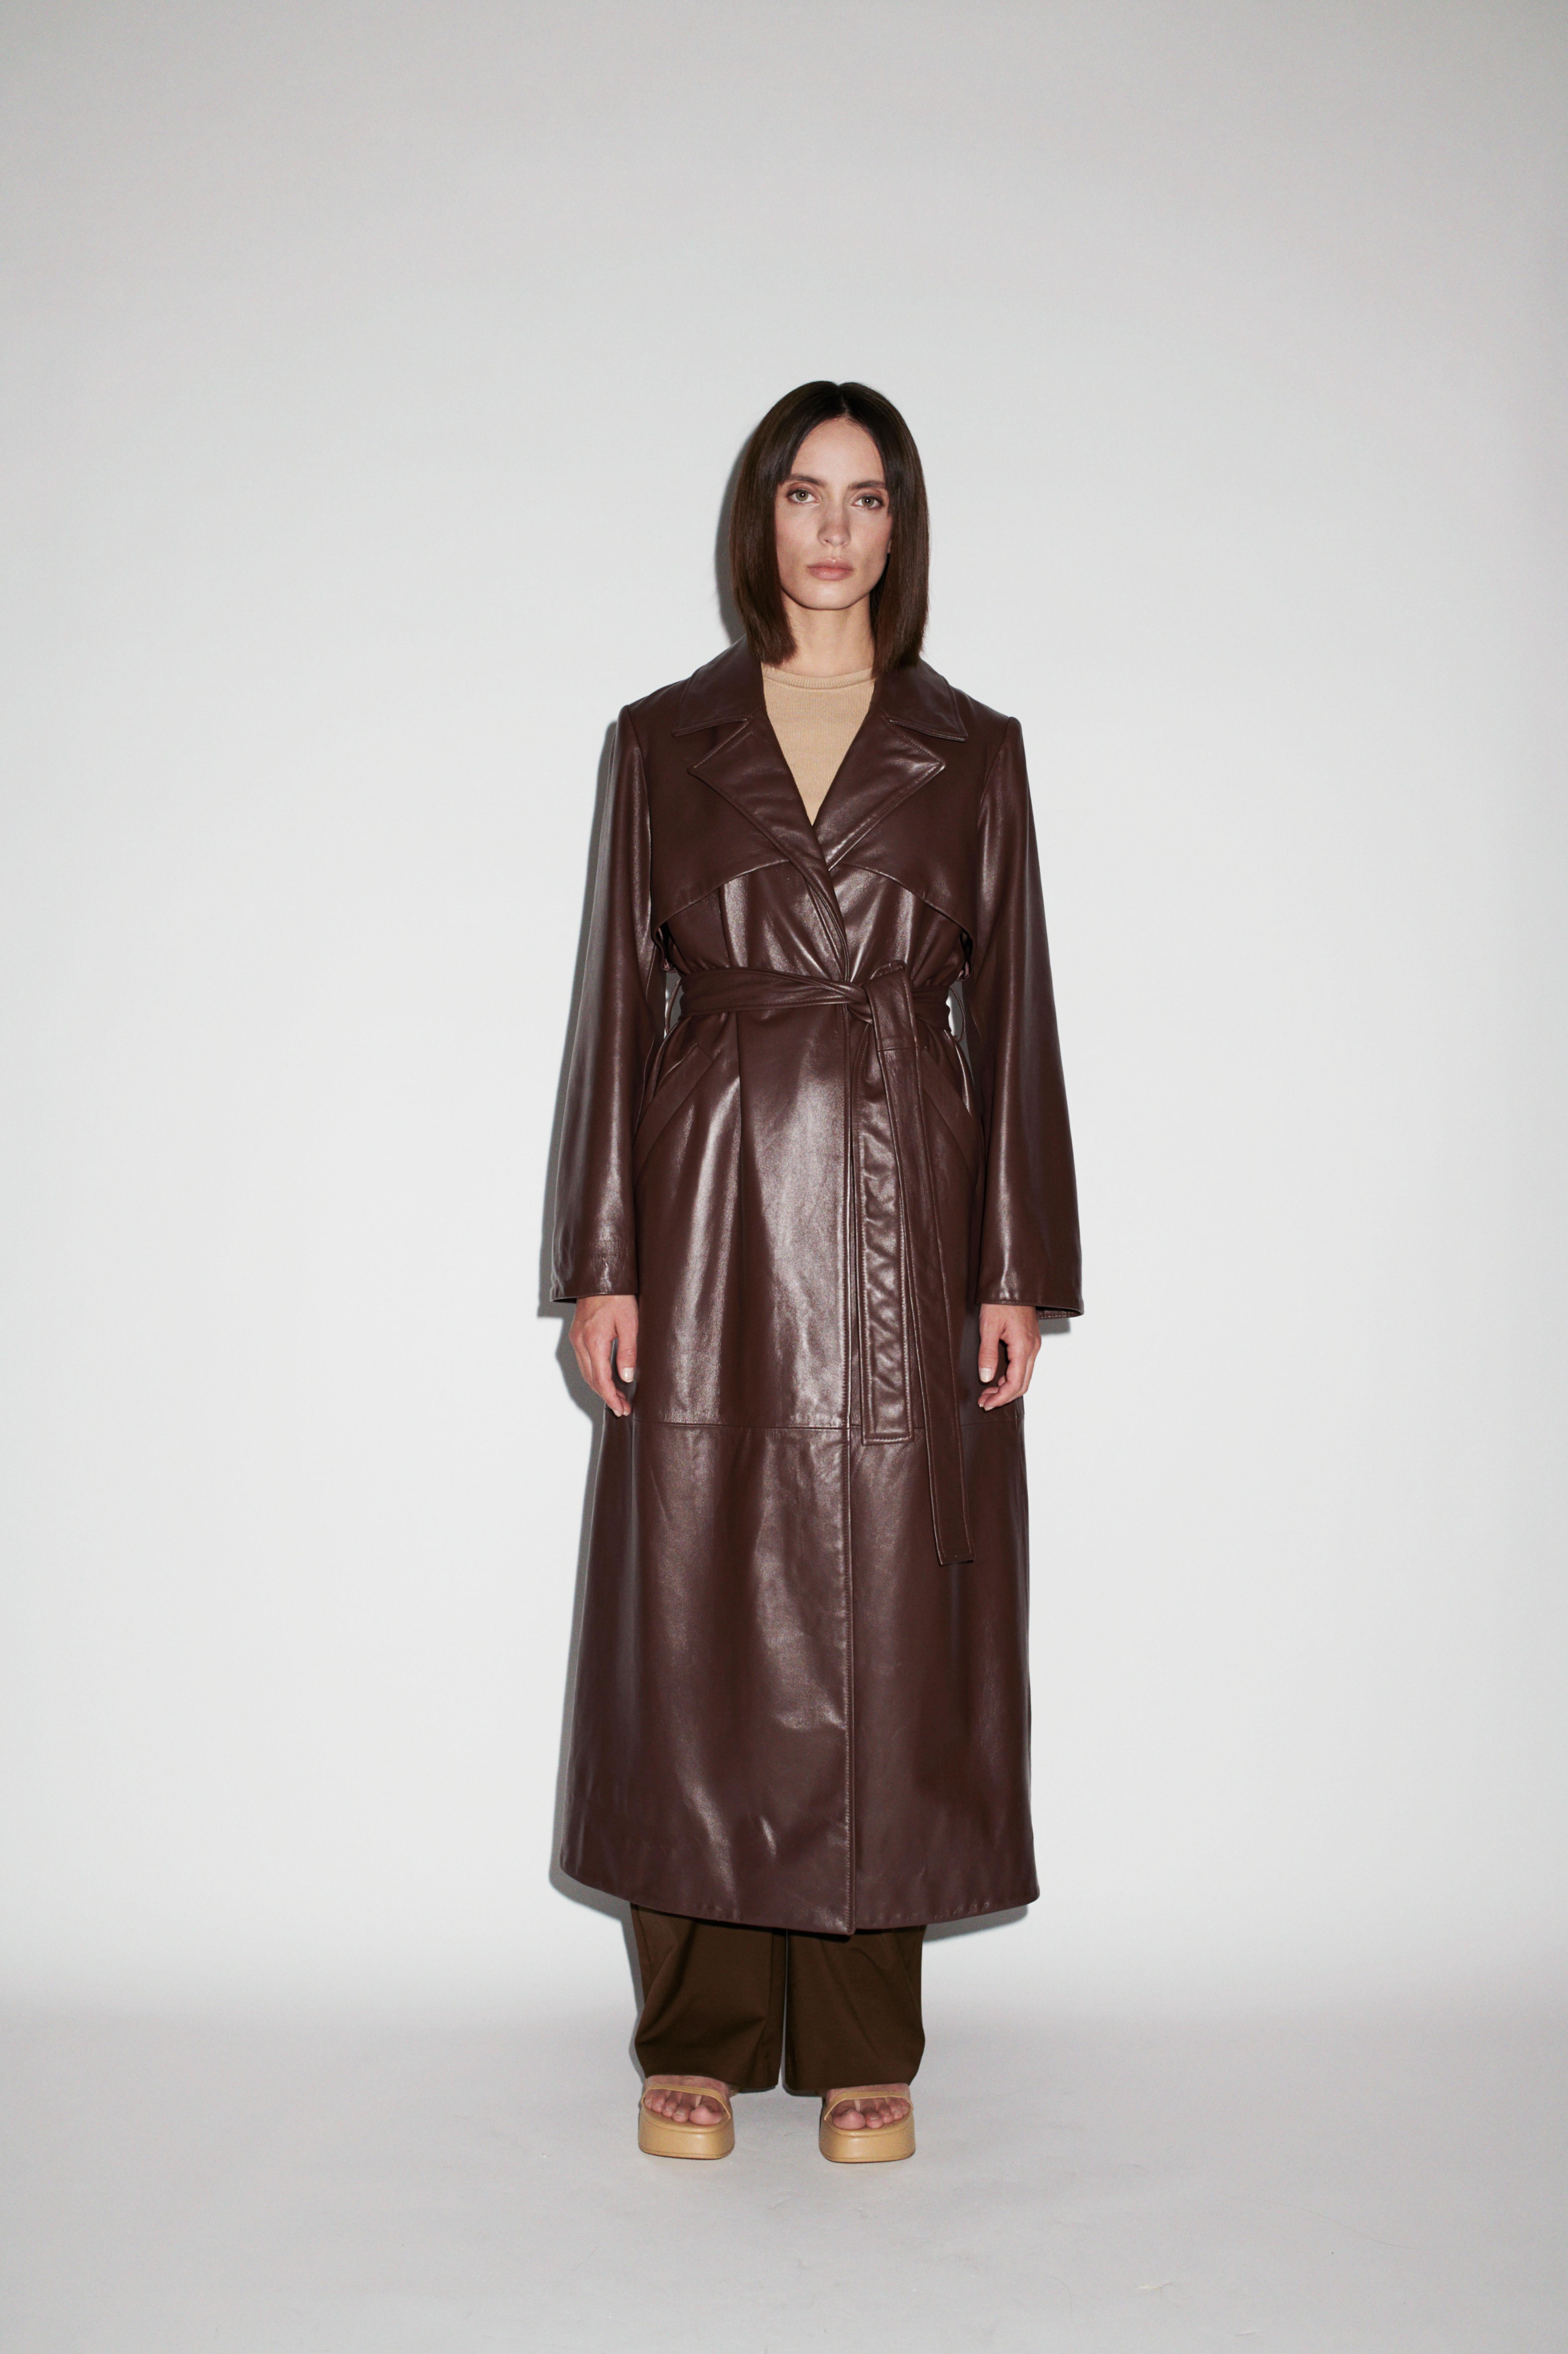 Verheyen London Leather Trench Coat in Chocolate Brown - Size uk 14

Handmade in London, made with 100% Italian Lambs Leather this luxury item is an investment piece to wear for a lifetime.  This piece is made by artisans in London, expert artisans